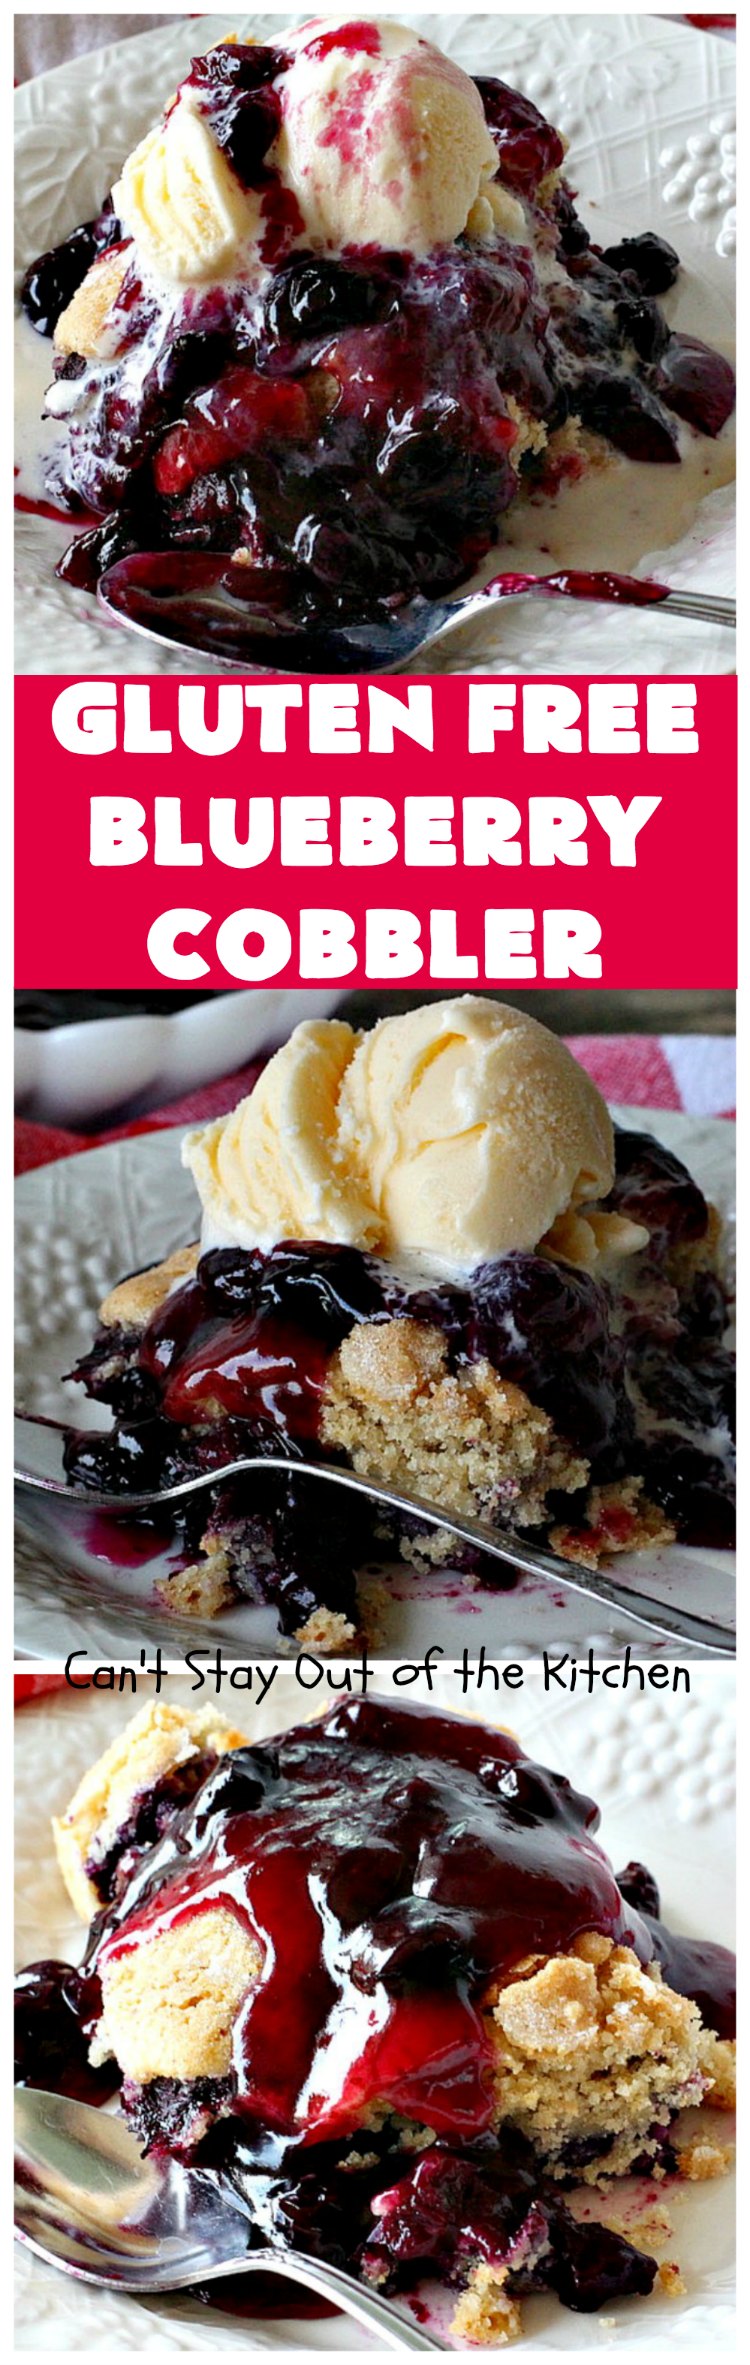 Gluten Free Blueberry Cobbler | Can't Stay Out of the Kitchen